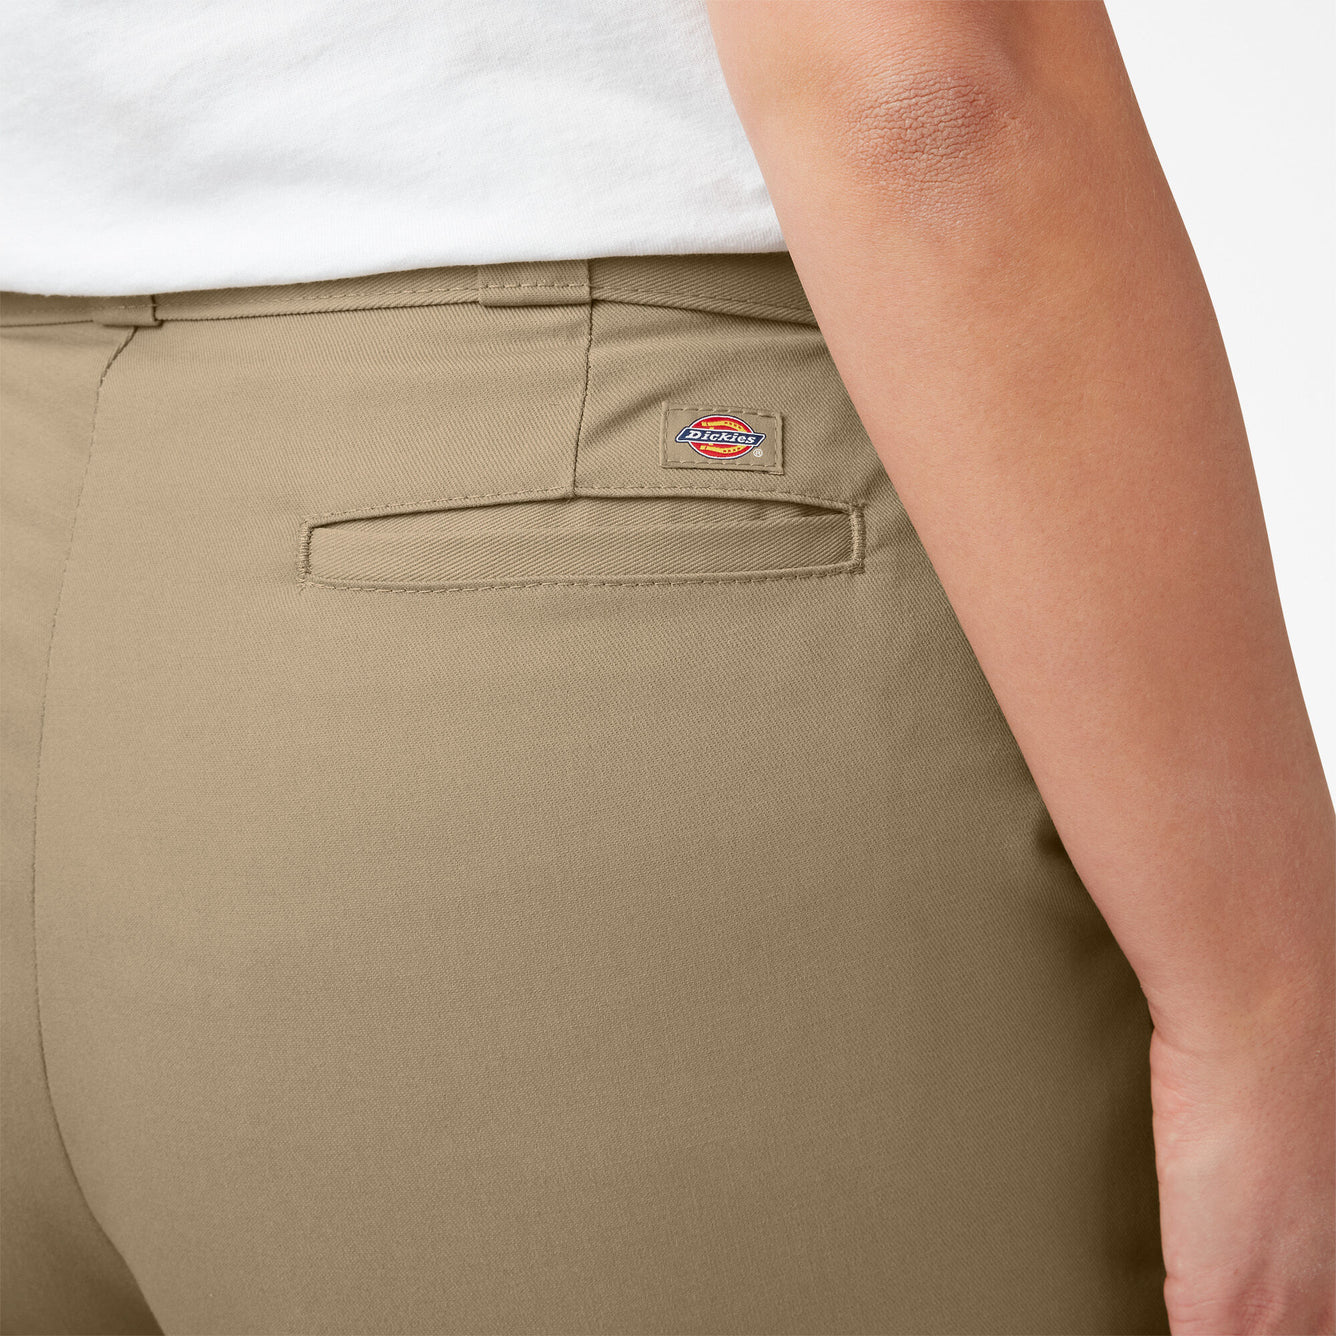 Dickies - Made to Fit the Curvy Girl - Women's Plus Original 874